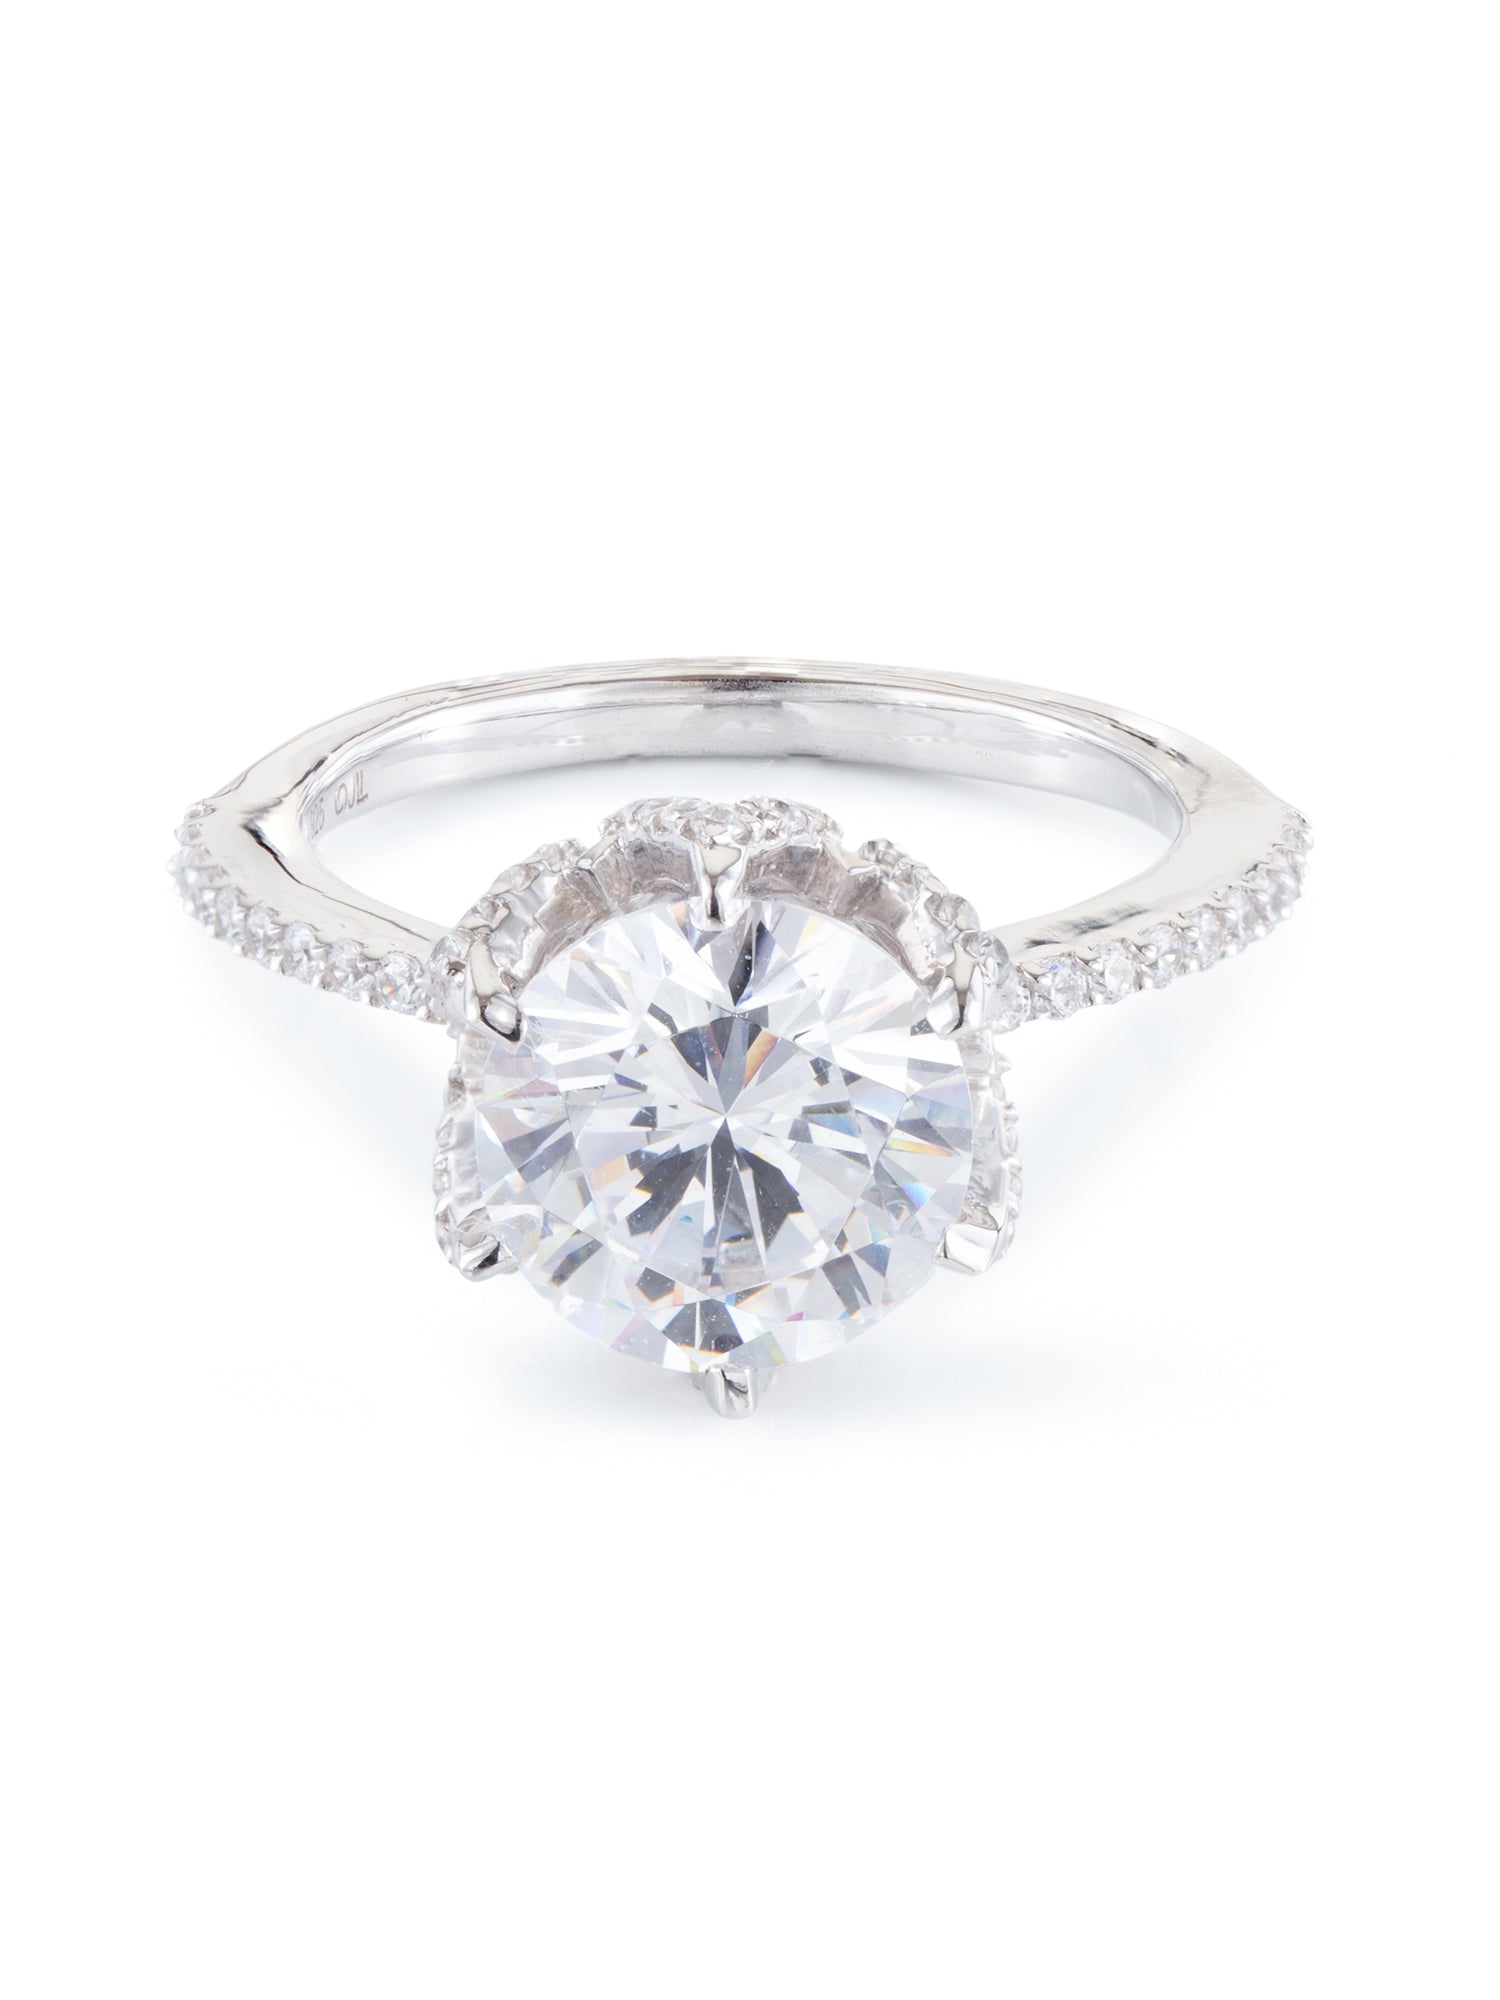 ORNATE JEWELS 5 CARAT SOLITAIRE RING-3